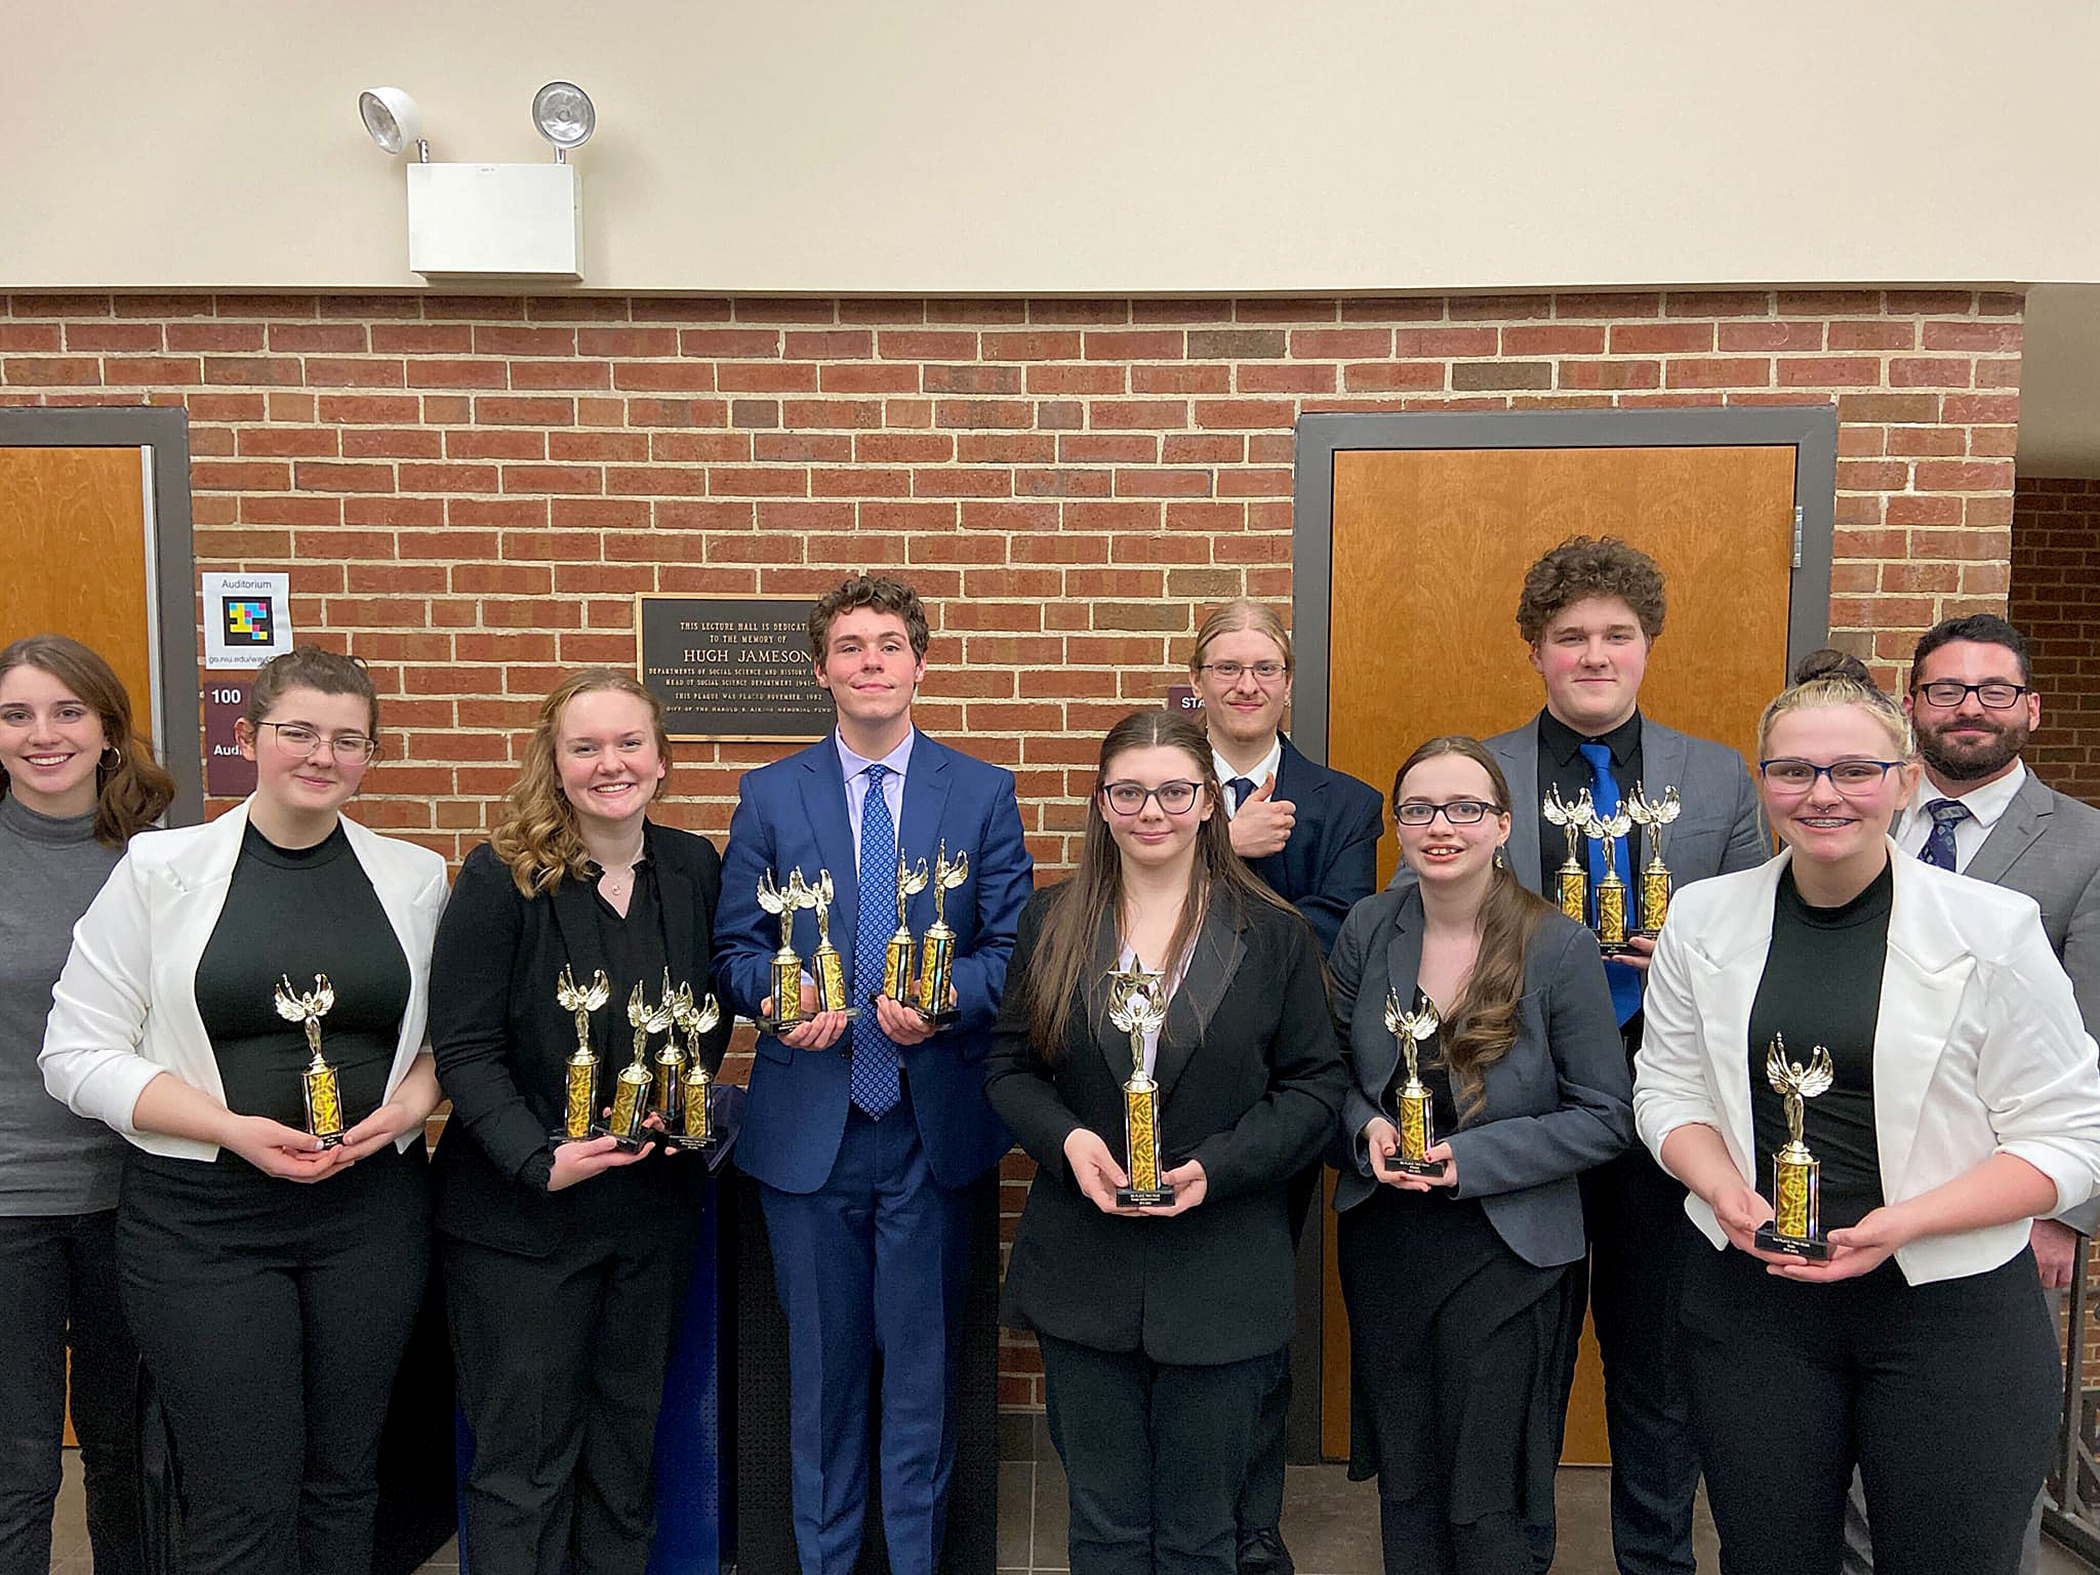 Speech team members pose with trophies